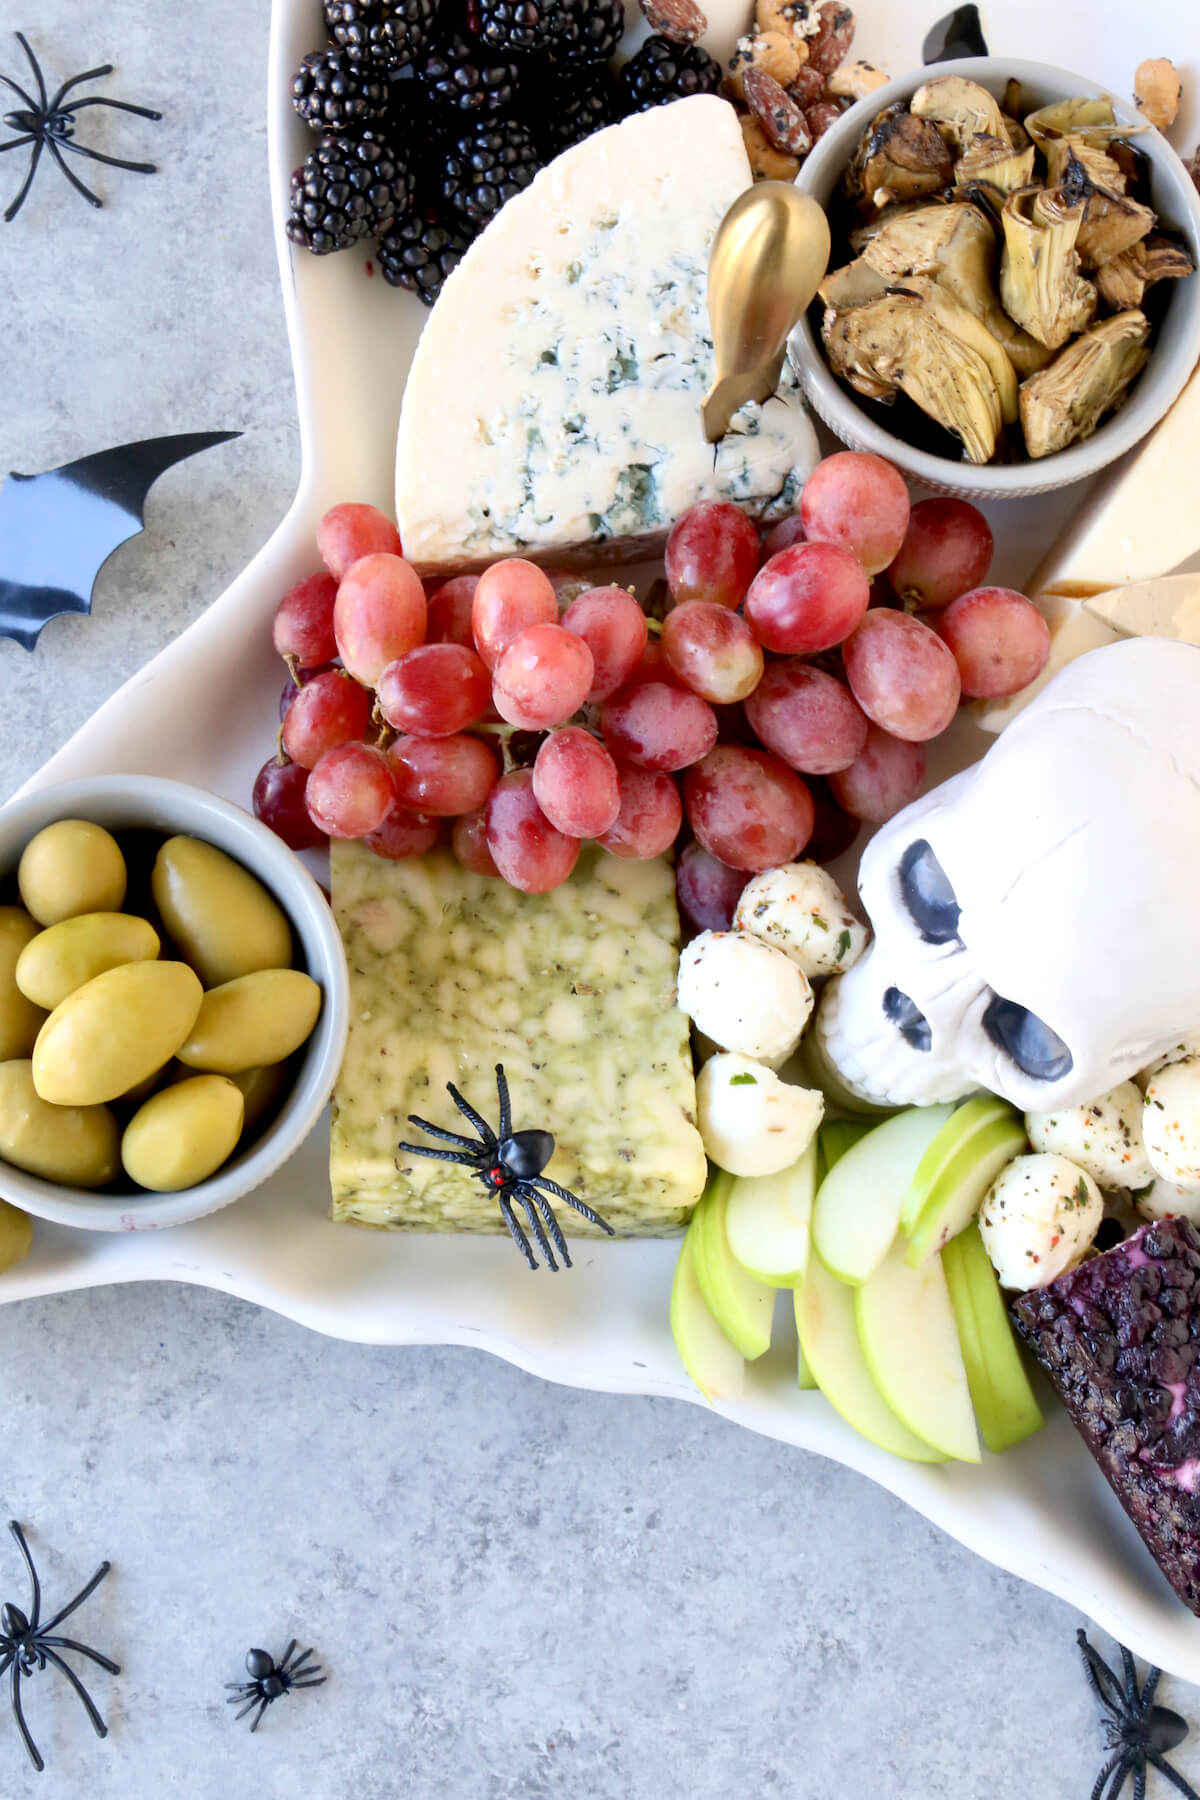 A ghost platter filled with blackberries, grapes, apple slices, three cheese wedges, olives and artichoke hearts.